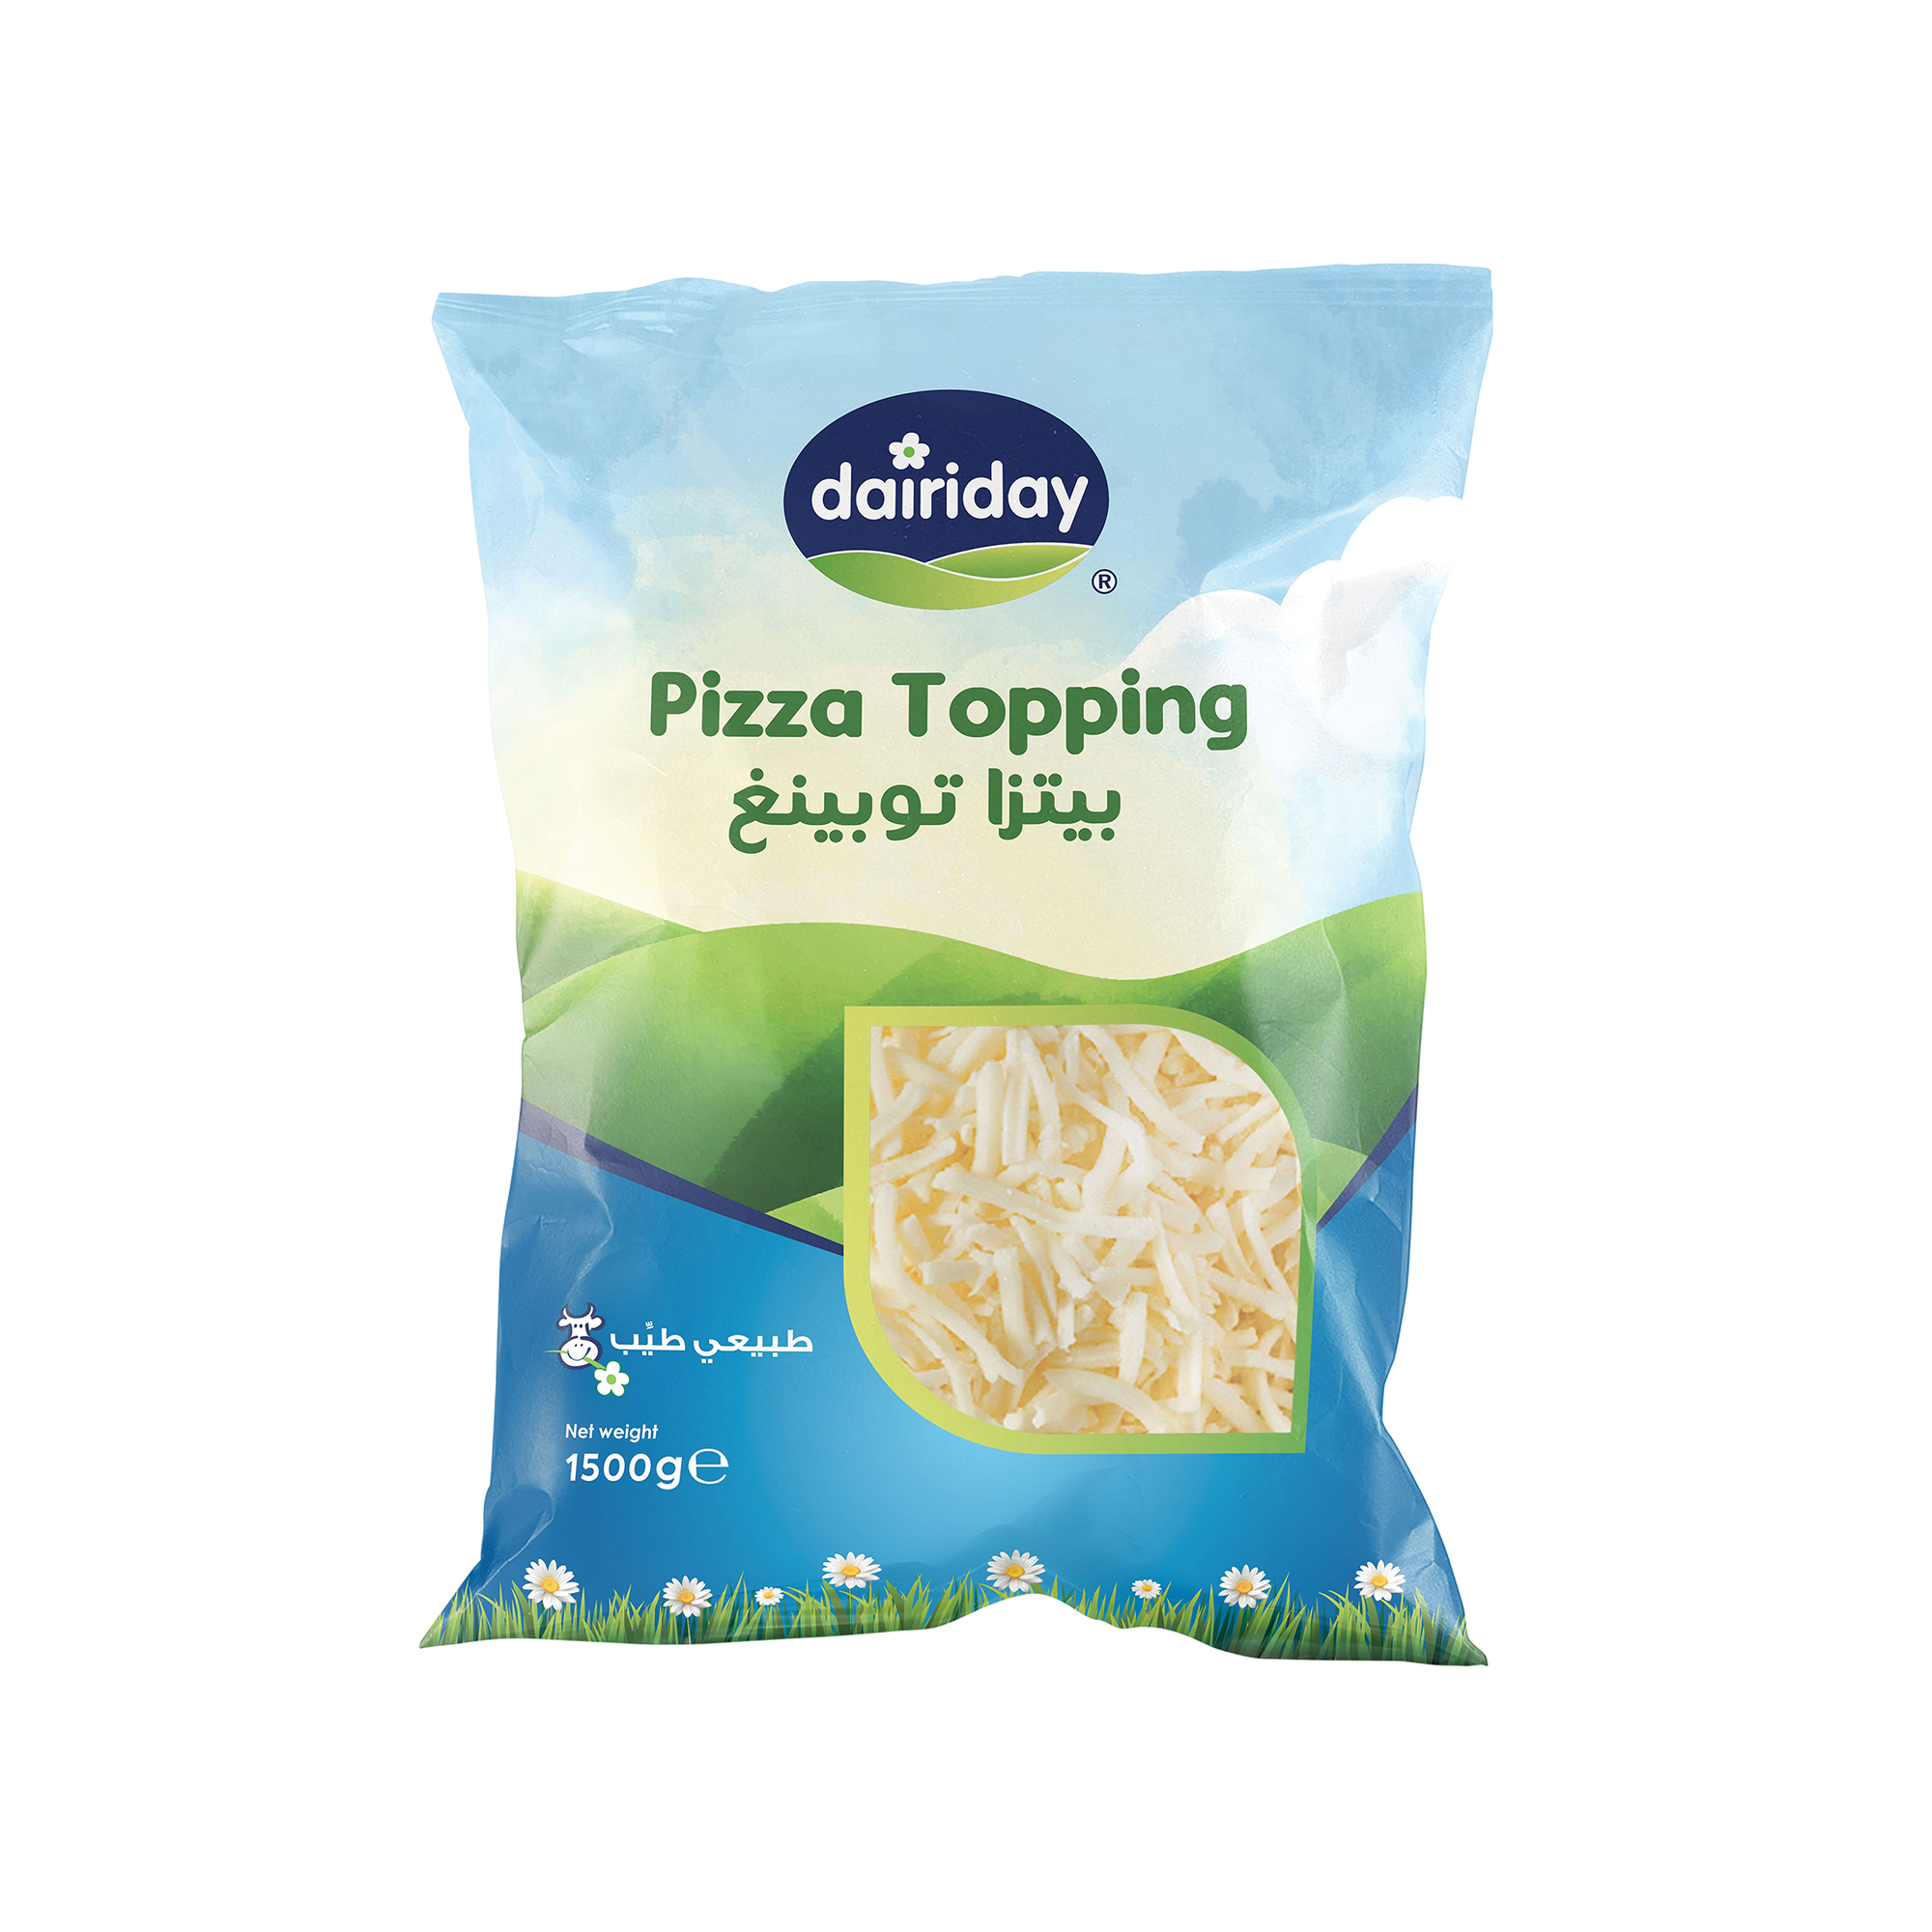 Dairiday-Shredded-Pizza-Topping-1500g-cheese